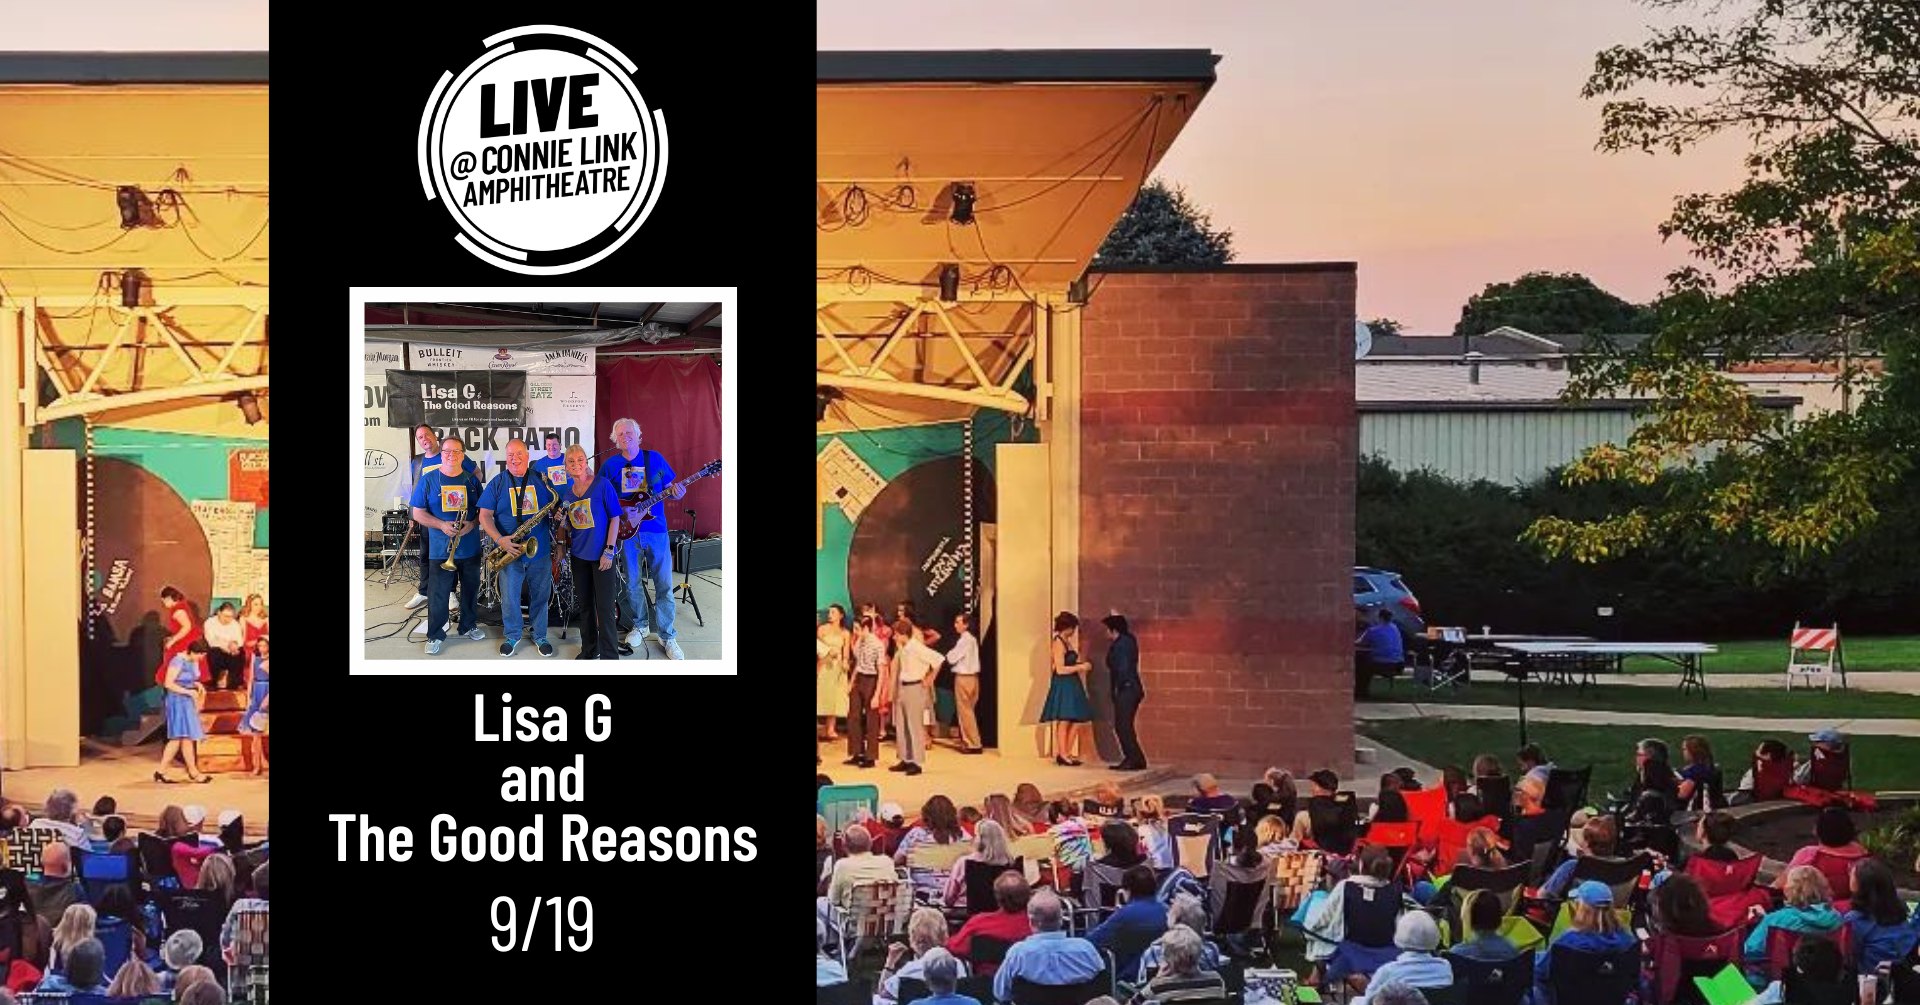 Normal LIVE presents Lisa G and The Good Reasons at Connie Link Amphitheatre